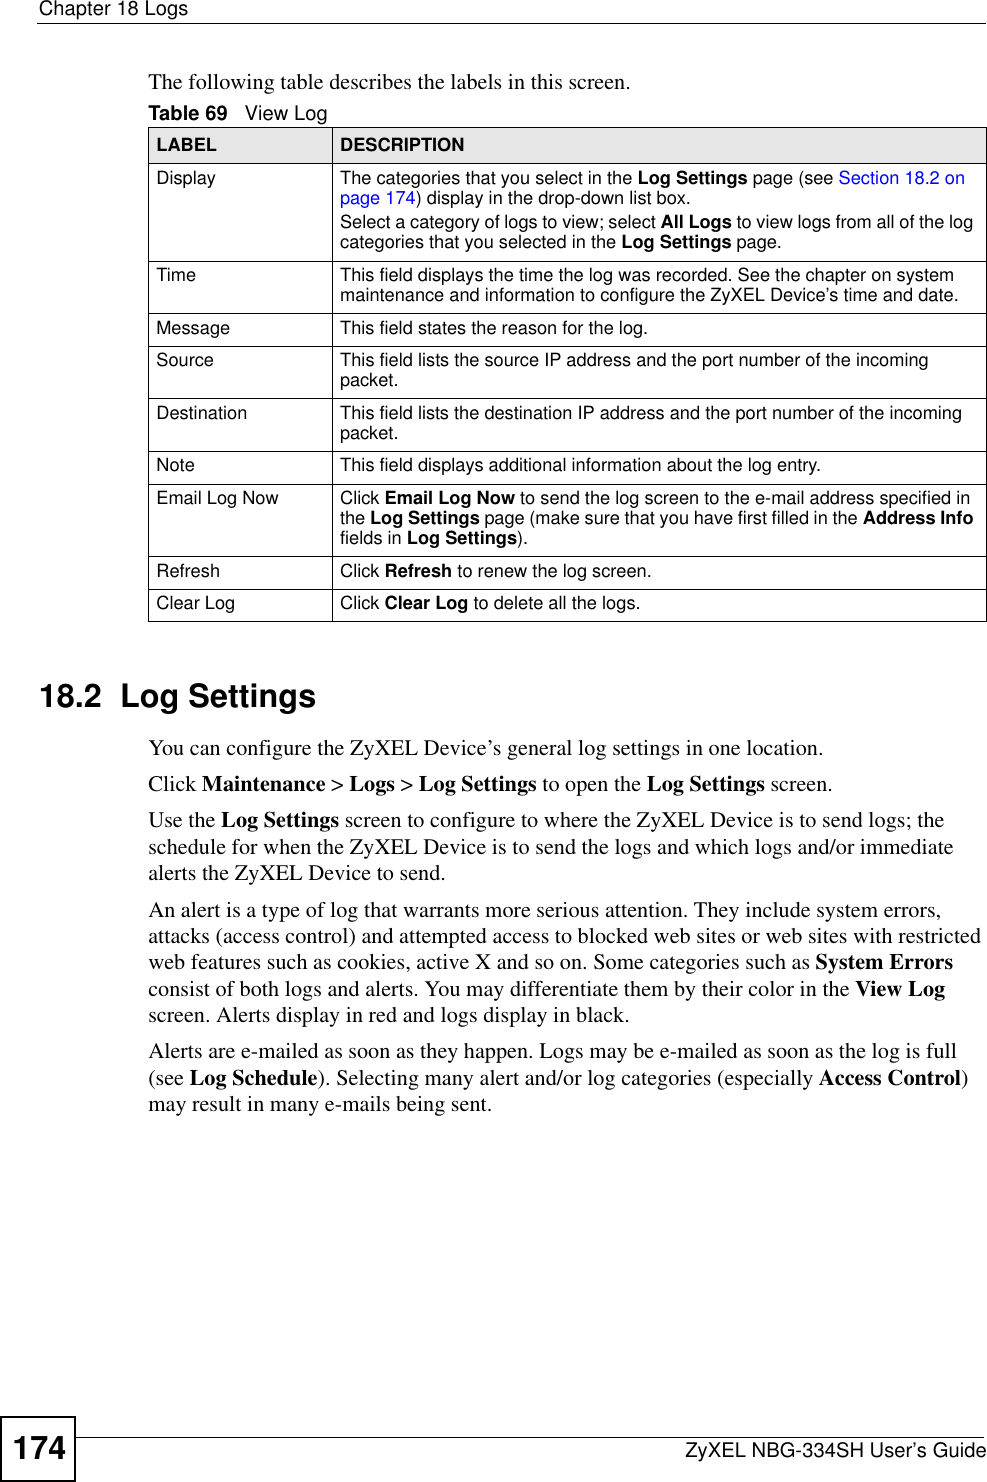 Chapter 18 LogsZyXEL NBG-334SH User’s Guide174The following table describes the labels in this screen.18.2  Log SettingsYou can configure the ZyXEL Device’s general log settings in one location.Click Maintenance &gt; Logs &gt; Log Settings to open the Log Settings screen.Use the Log Settings screen to configure to where the ZyXEL Device is to send logs; the schedule for when the ZyXEL Device is to send the logs and which logs and/or immediate alerts the ZyXEL Device to send.An alert is a type of log that warrants more serious attention. They include system errors, attacks (access control) and attempted access to blocked web sites or web sites with restricted web features such as cookies, active X and so on. Some categories such as System Errorsconsist of both logs and alerts. You may differentiate them by their color in the View Log screen. Alerts display in red and logs display in black.Alerts are e-mailed as soon as they happen. Logs may be e-mailed as soon as the log is full (see Log Schedule). Selecting many alert and/or log categories (especially Access Control)may result in many e-mails being sent.Table 69   View LogLABEL DESCRIPTIONDisplay  The categories that you select in the Log Settings page (see Section 18.2 on page 174) display in the drop-down list box.Select a category of logs to view; select All Logs to view logs from all of the log categories that you selected in the Log Settings page. Time  This field displays the time the log was recorded. See the chapter on system maintenance and information to configure the ZyXEL Device’s time and date.Message This field states the reason for the log.Source This field lists the source IP address and the port number of the incoming packet.Destination  This field lists the destination IP address and the port number of the incoming packet.Note This field displays additional information about the log entry. Email Log Now  Click Email Log Now to send the log screen to the e-mail address specified in the Log Settings page (make sure that you have first filled in the Address Infofields in Log Settings).Refresh Click Refresh to renew the log screen. Clear Log  Click Clear Log to delete all the logs. 